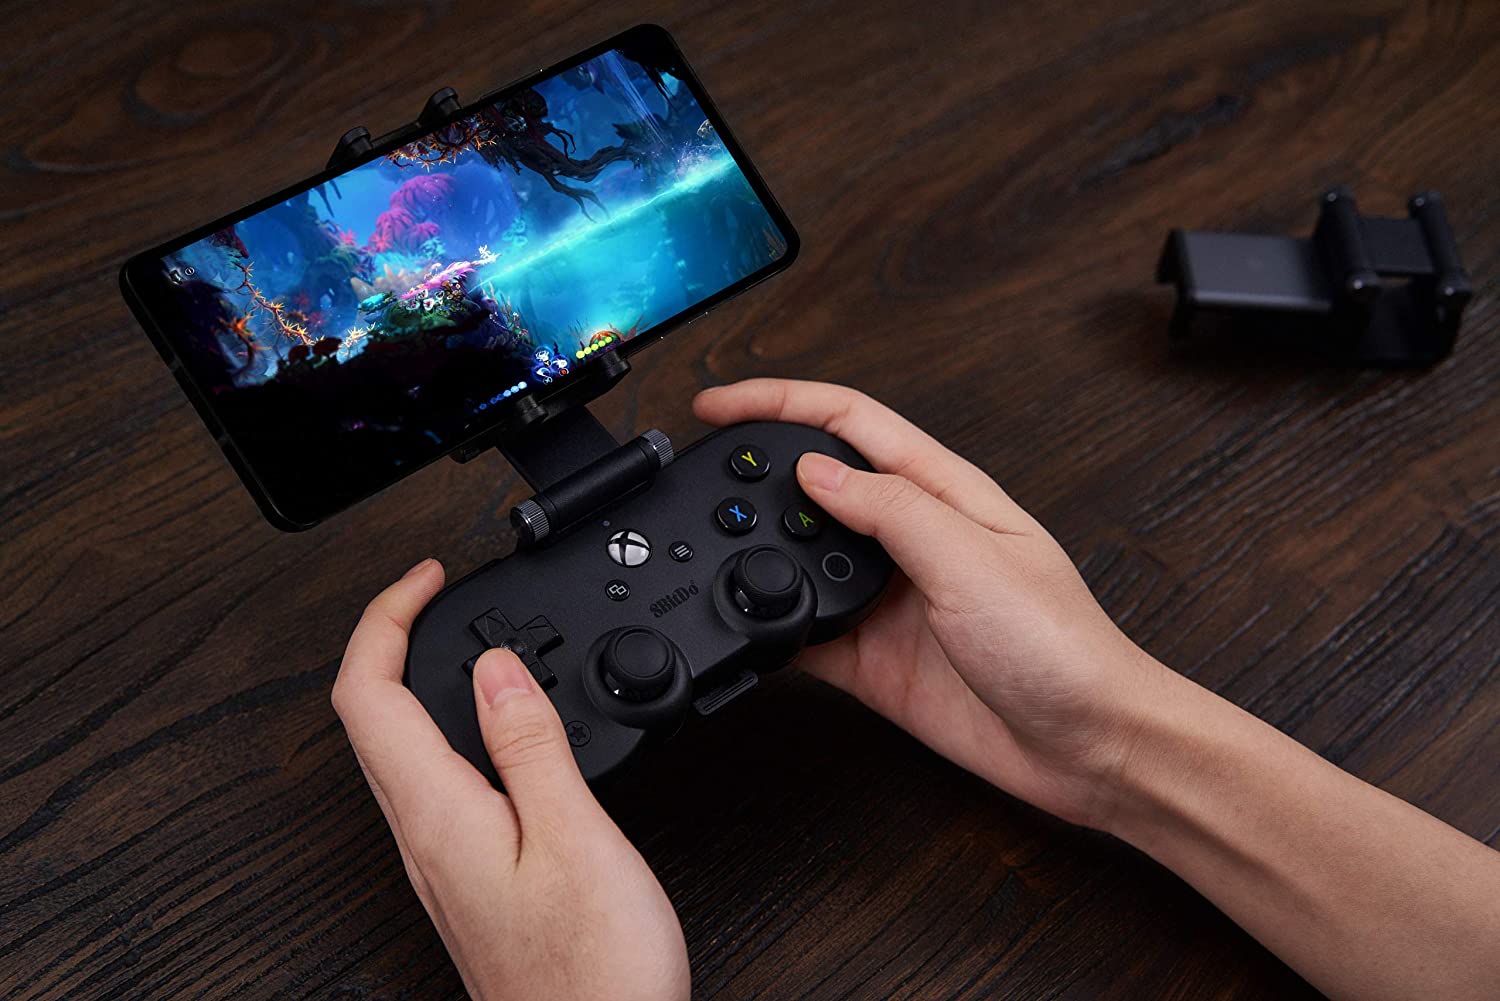 Stream Game Pass games to your Android with xCloud in September